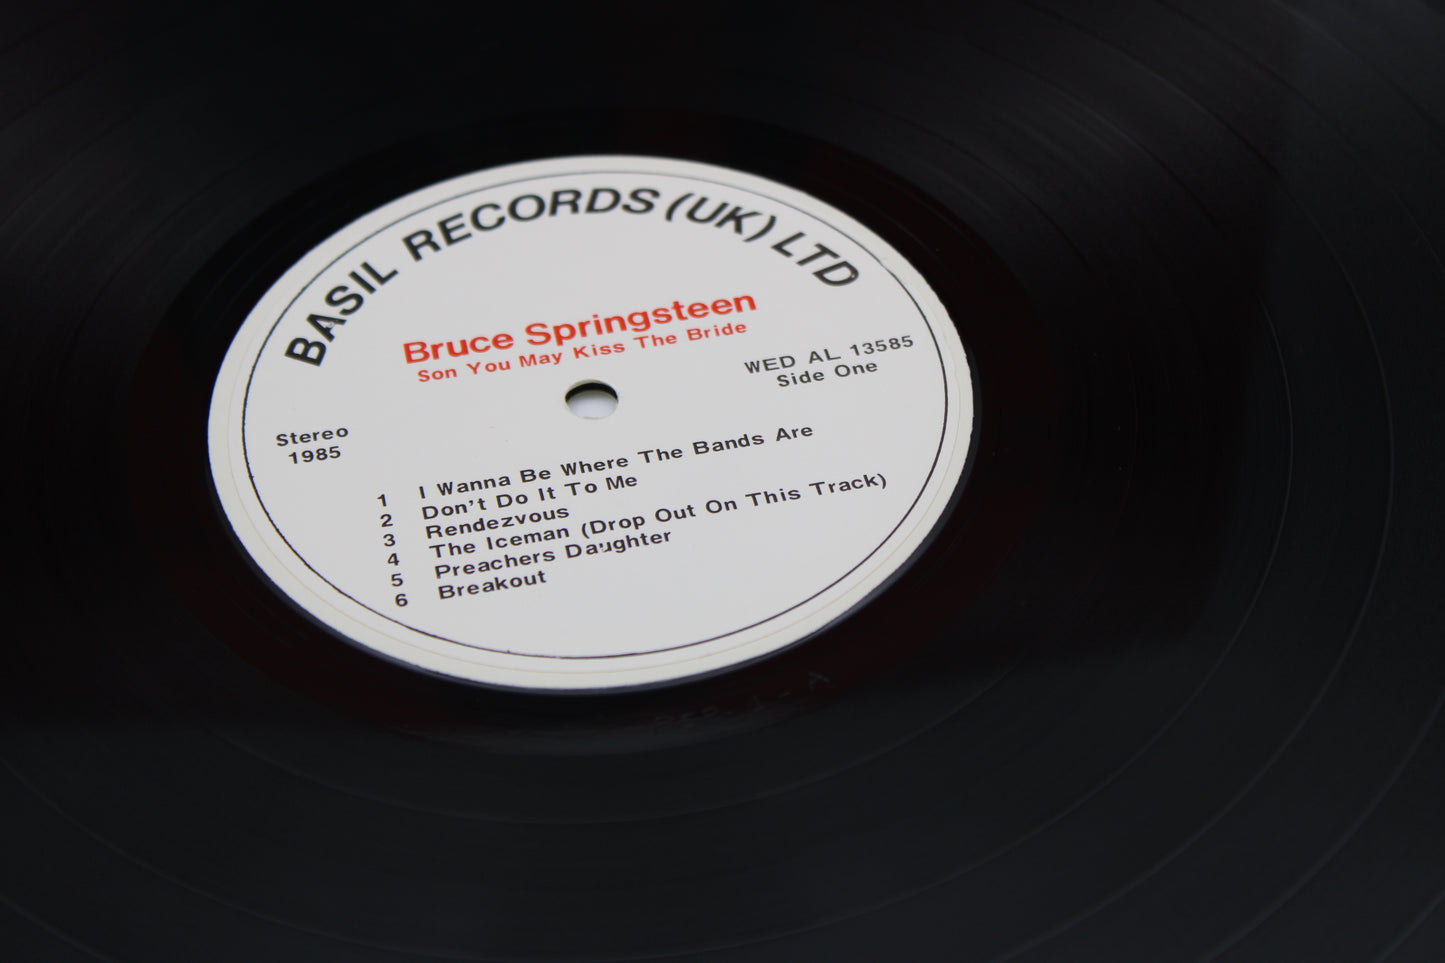 Bruce Springsteen - Son You May Kiss The Bride - LP 12" Unofficial Vinyl on Basil Records Near Mint